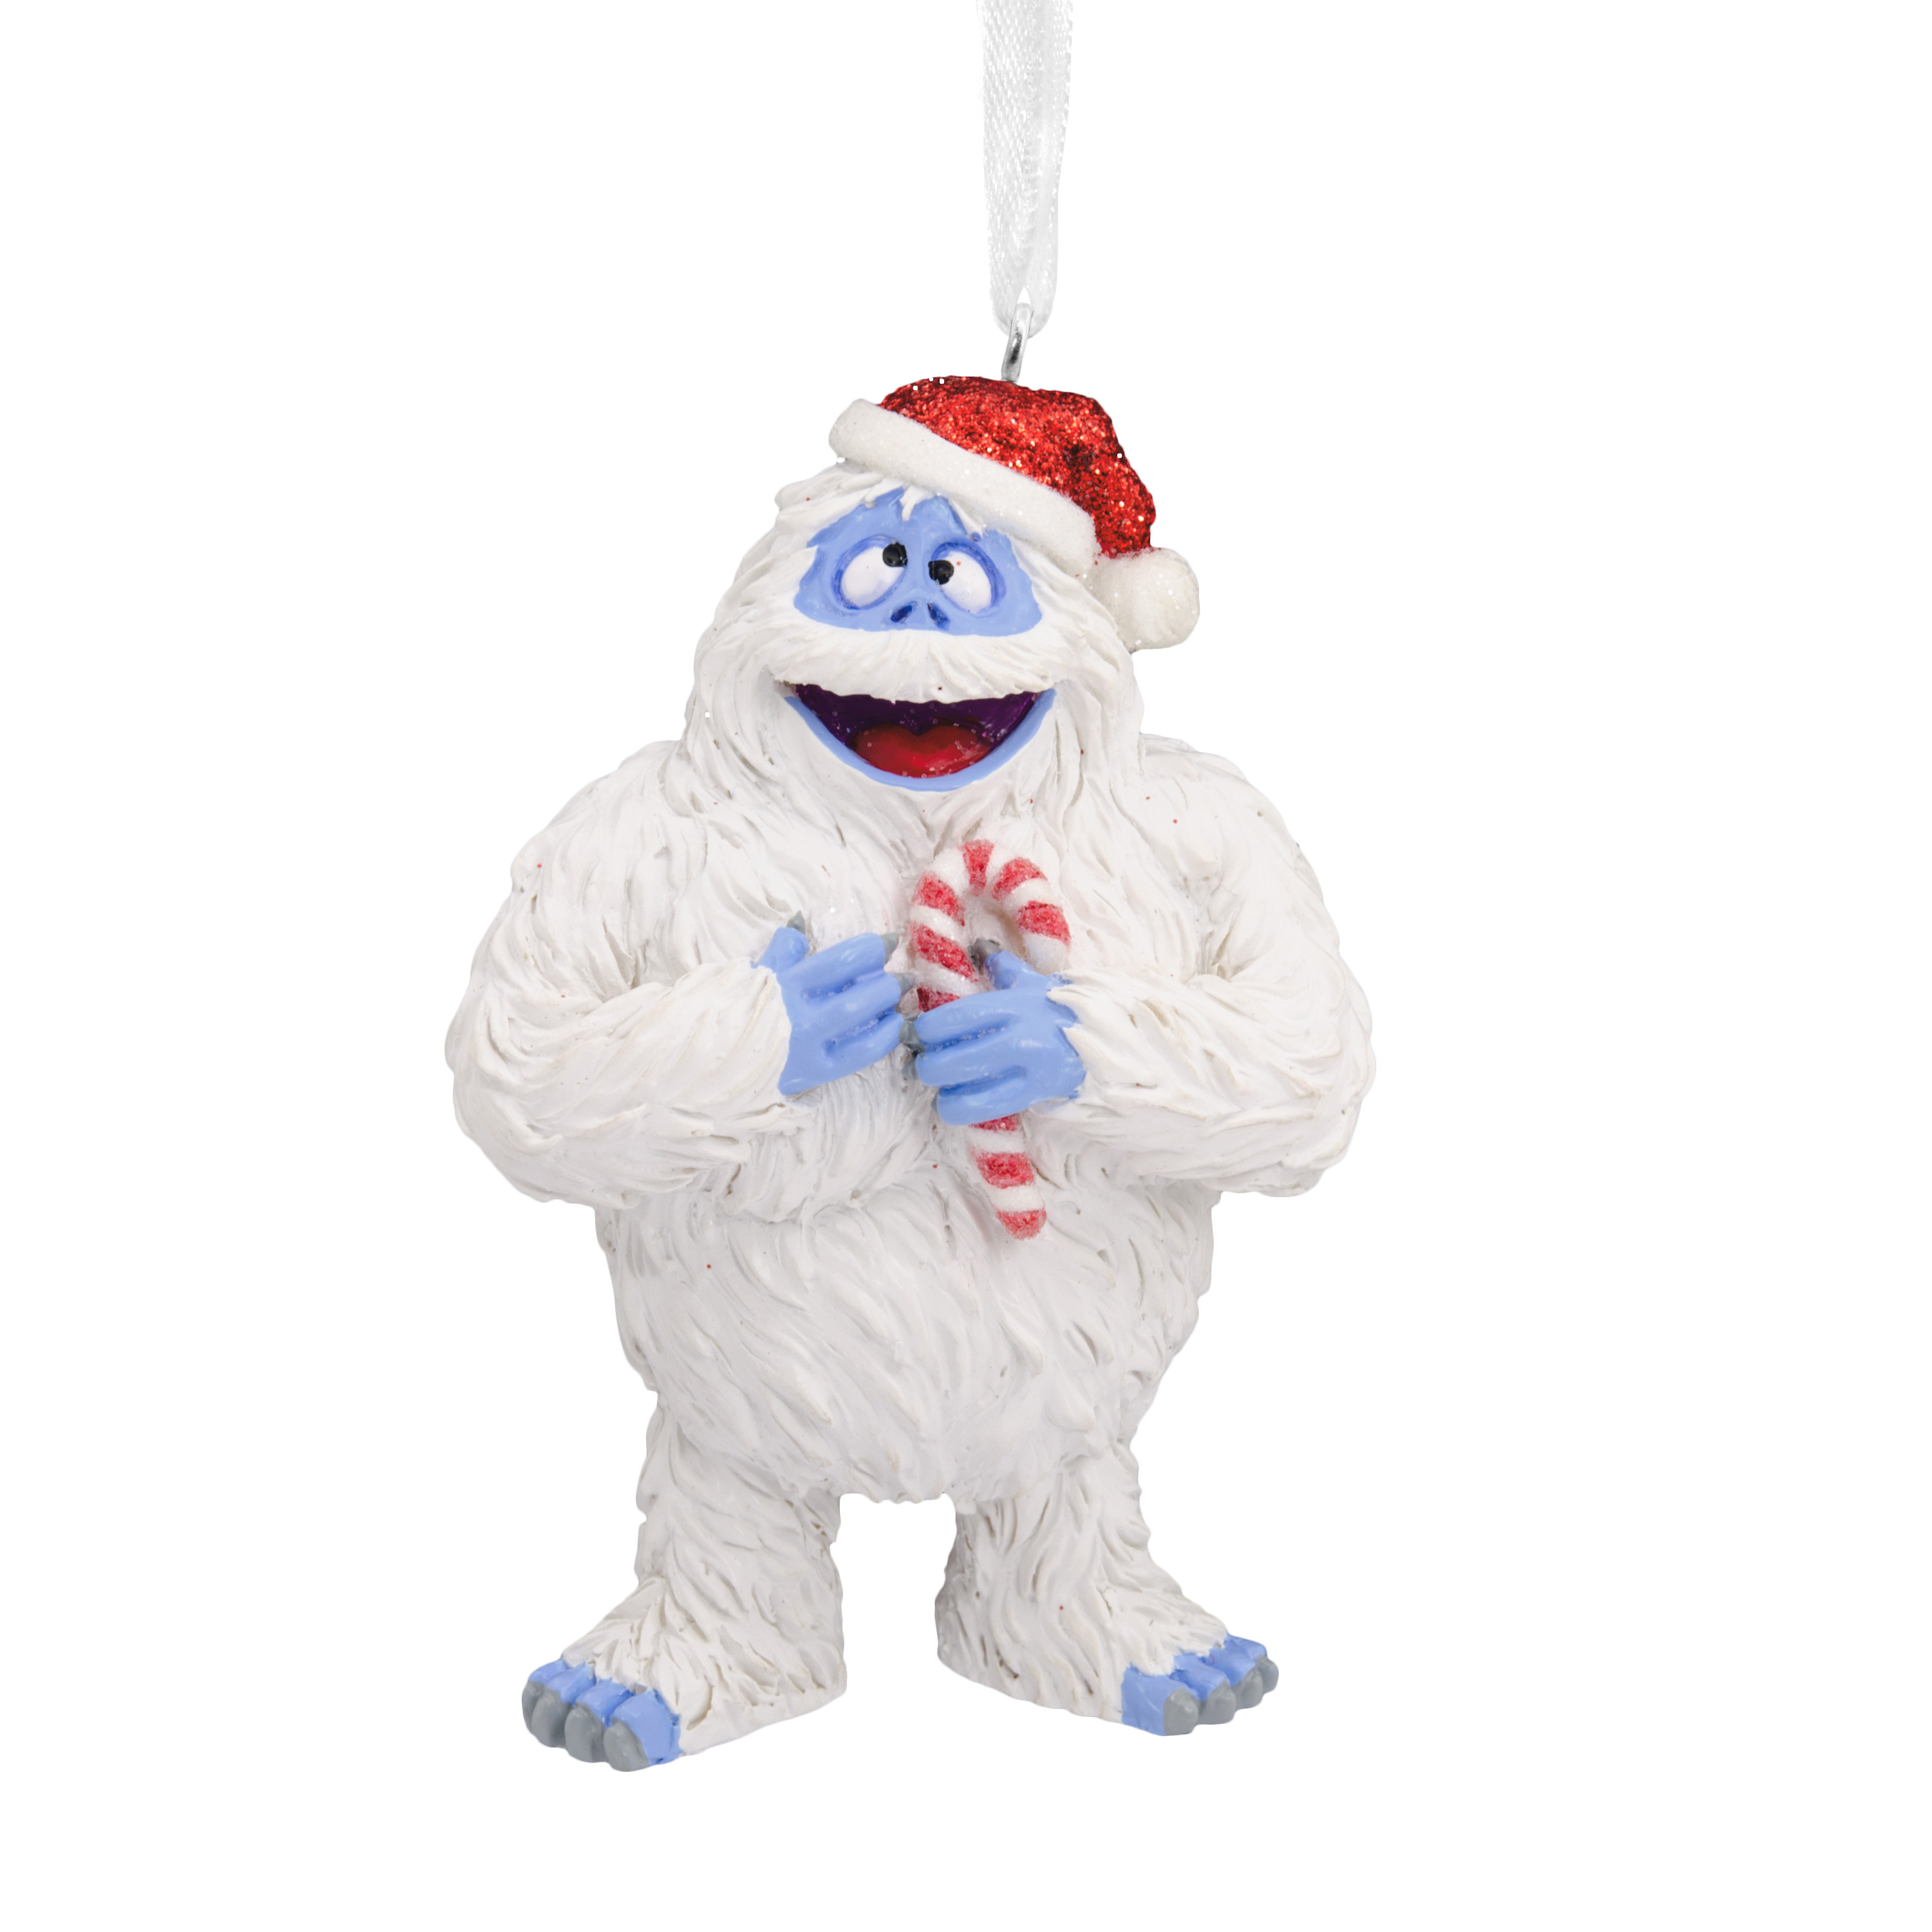 Hallmark Rudolph The Red Nosed Reindeer Bumble The Abominable Snow